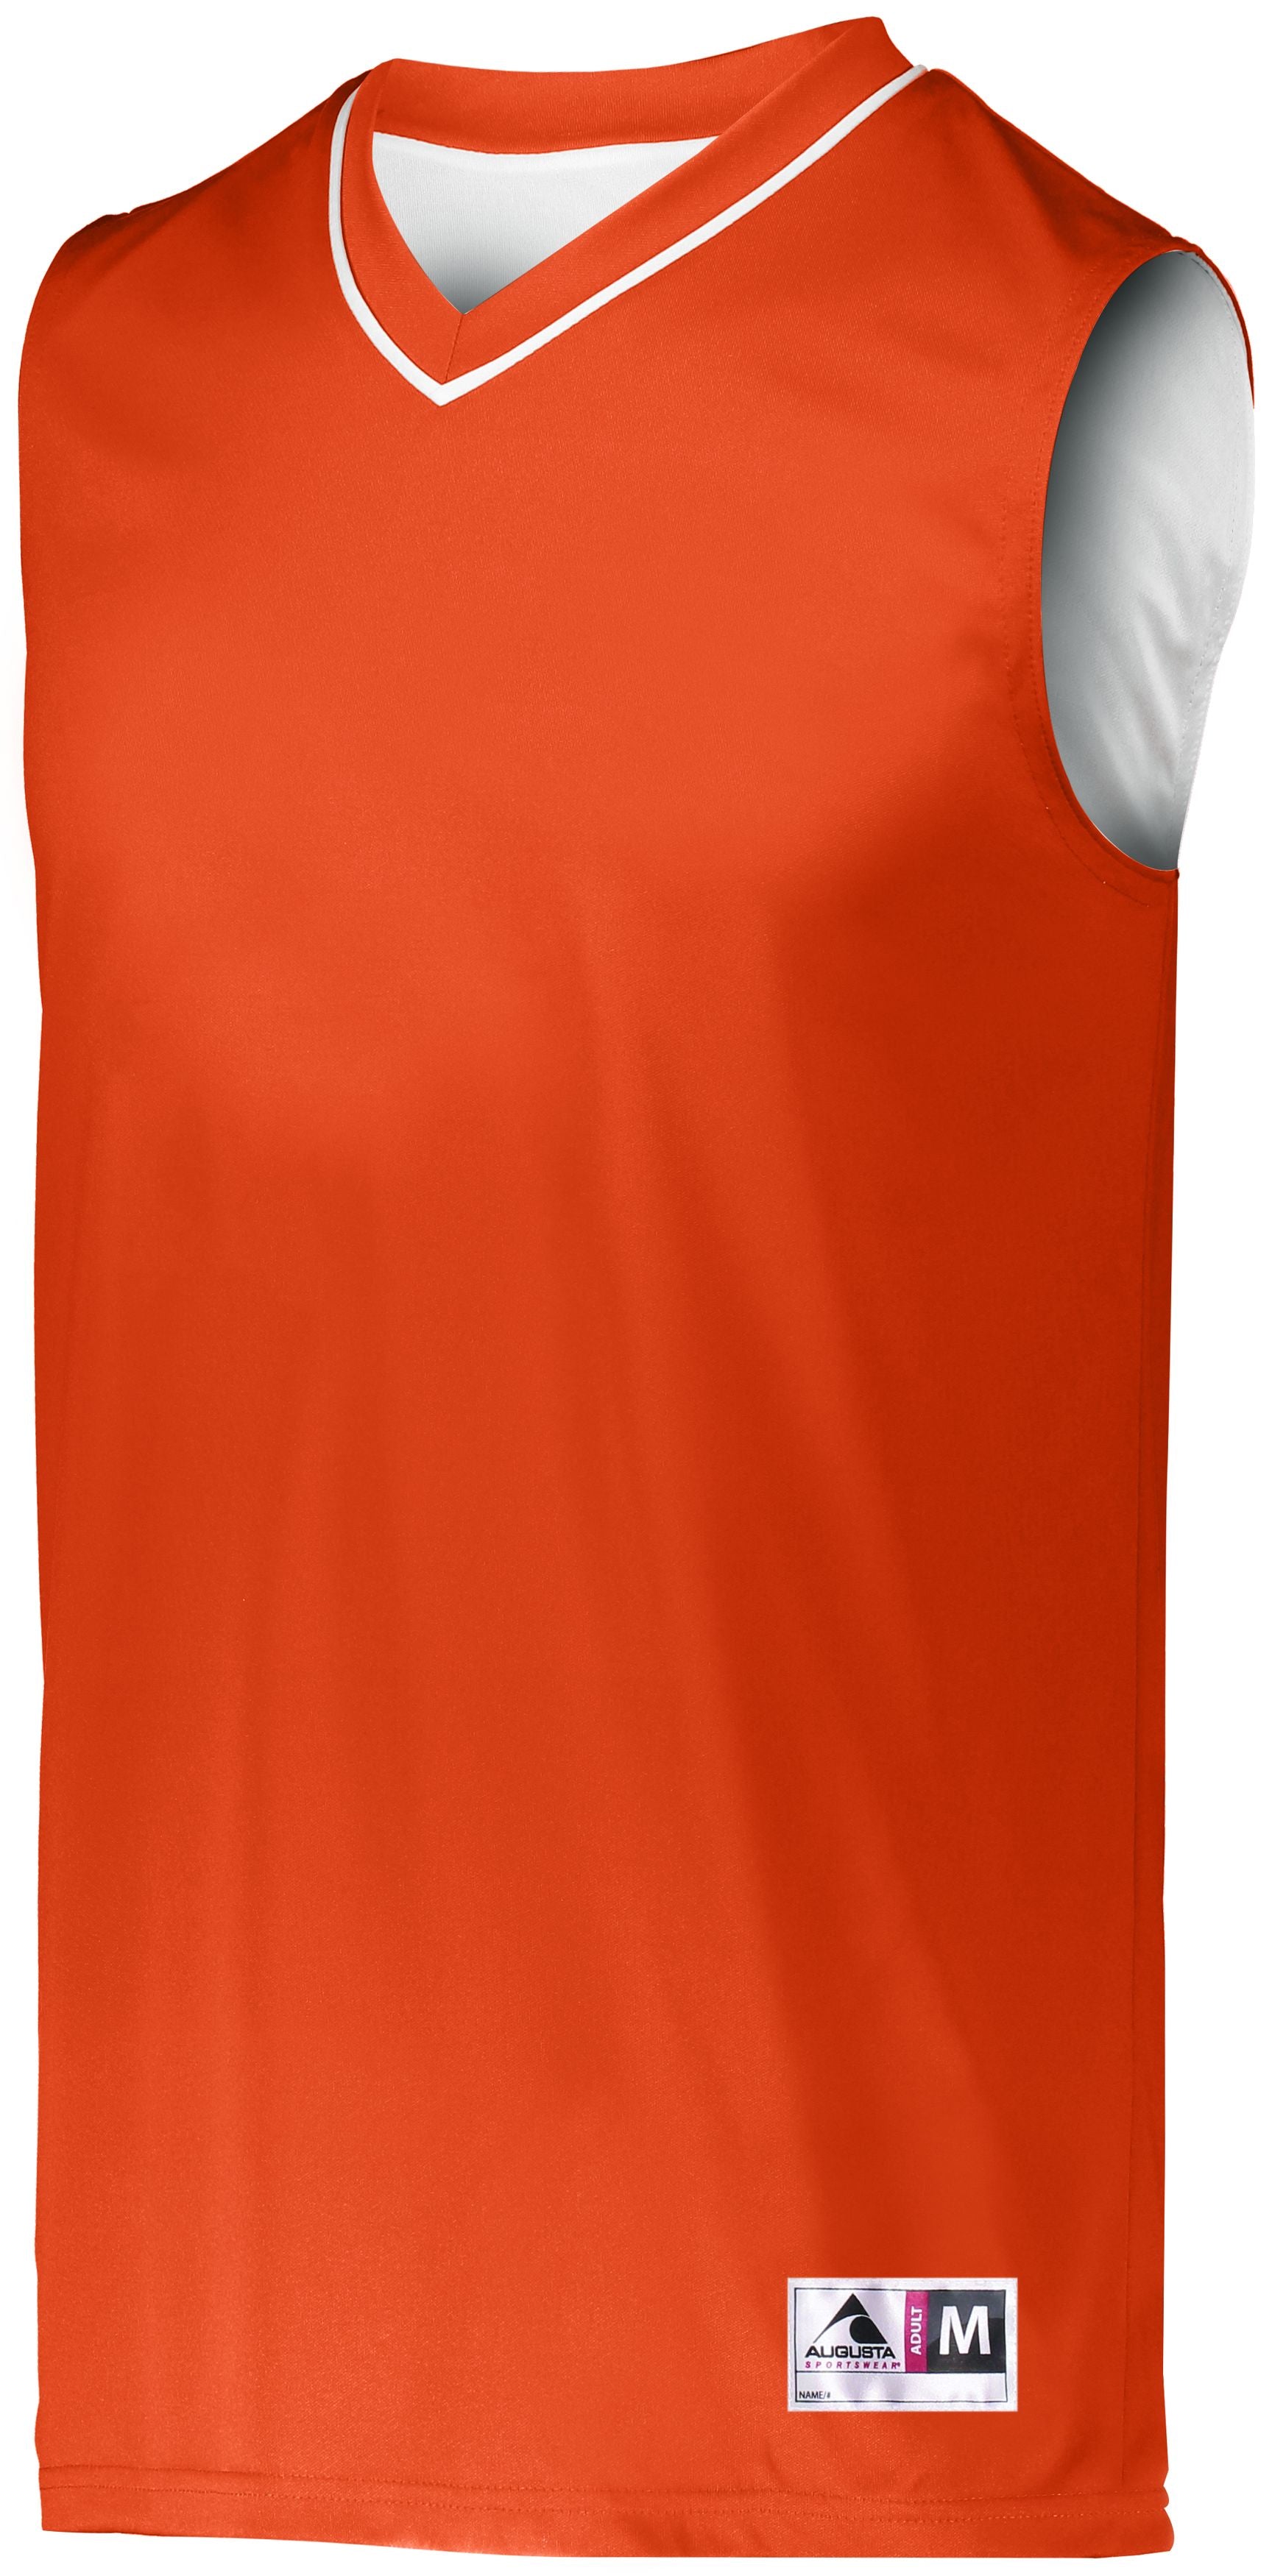 Augusta Sportswear Reversible Two-Color Jersey in Orange/White  -Part of the Adult, Adult-Jersey, Augusta-Products, Basketball, Shirts, All-Sports, All-Sports-1 product lines at KanaleyCreations.com